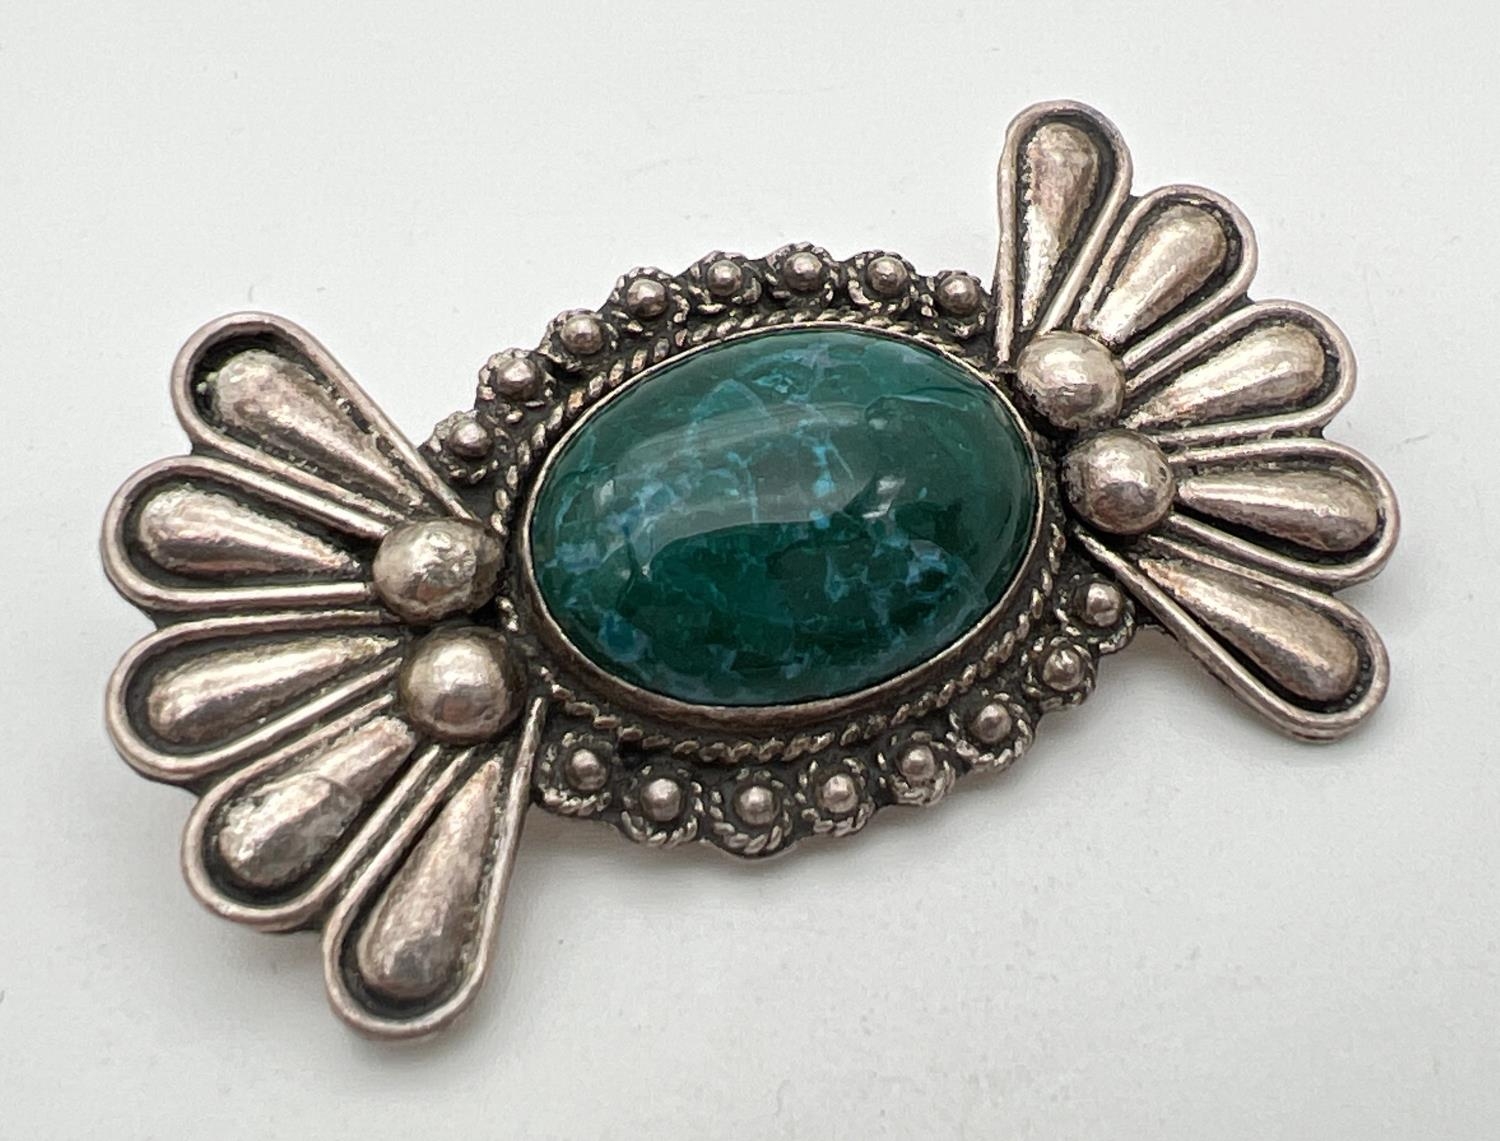 A silver modern design Floral style brooch set with a central oval green stone. Silver mark to back.